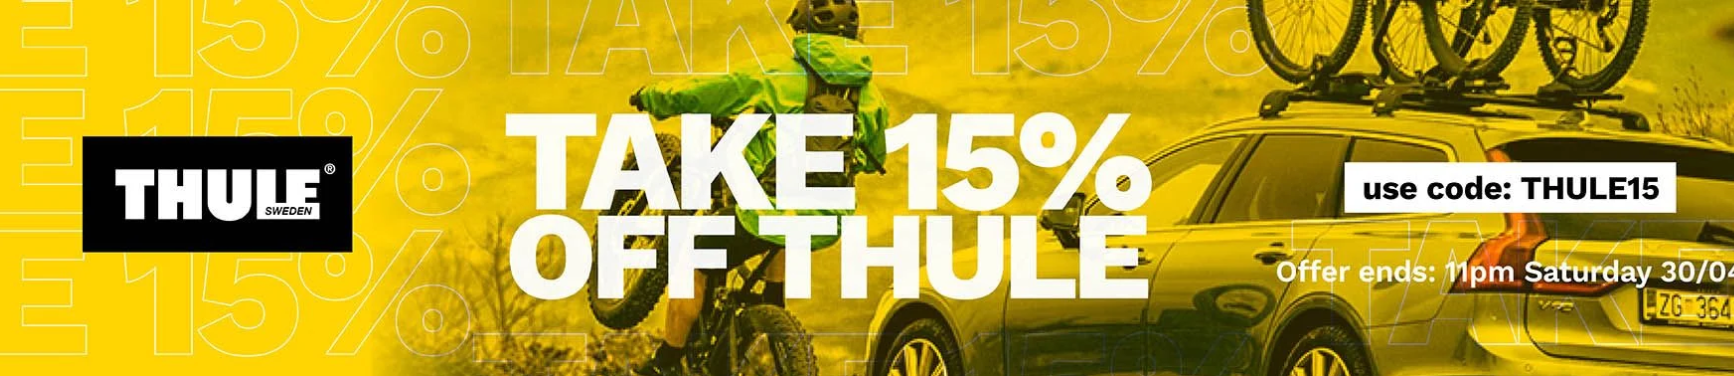 Extra 15% OFF on Thule trailers, bags, accessories with this Pushys promo code